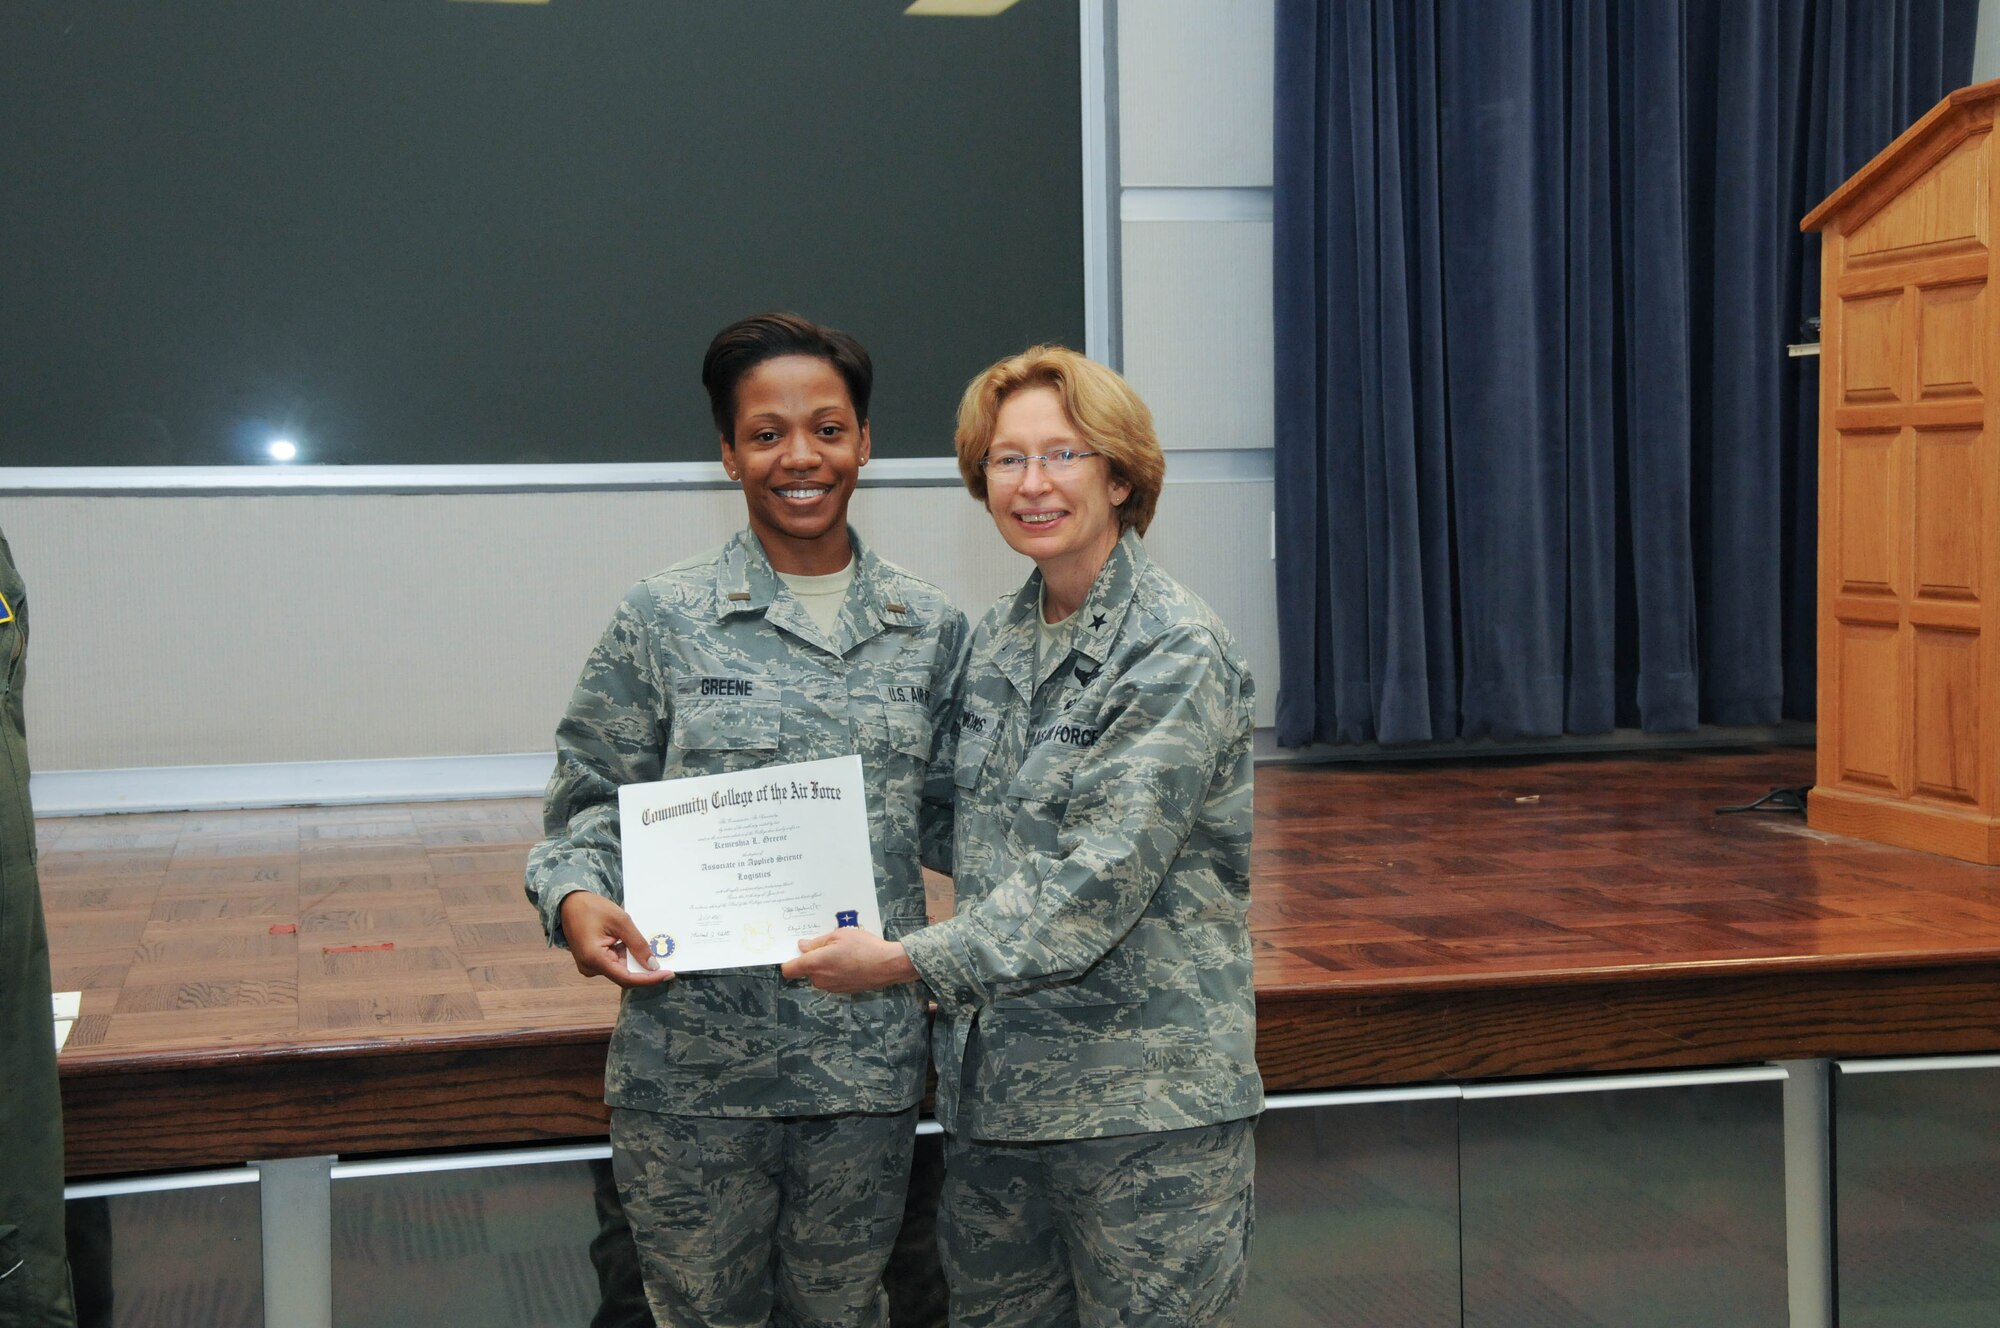 U.S. Air Force Master Sgt. (now 1st Lt.) Kemeshia Greene, left, a member of the 142nd Airlift Squadron, 166th Airlift Wing, receives a certificate from Brig. Gen. Carol Timmons, assistant adjutant general for air, Delaware National Guard to recognize Greene’s attainment of a Community College of the Air Force associate of applied science degree in logistics a CCAF Class of October 2013 graduation ceremony held Nov. 3, 2013 at the New Castle Air National Guard Base, Del. (U.S. Air National Guard photo by Tech. Sgt. Robin Meredith)